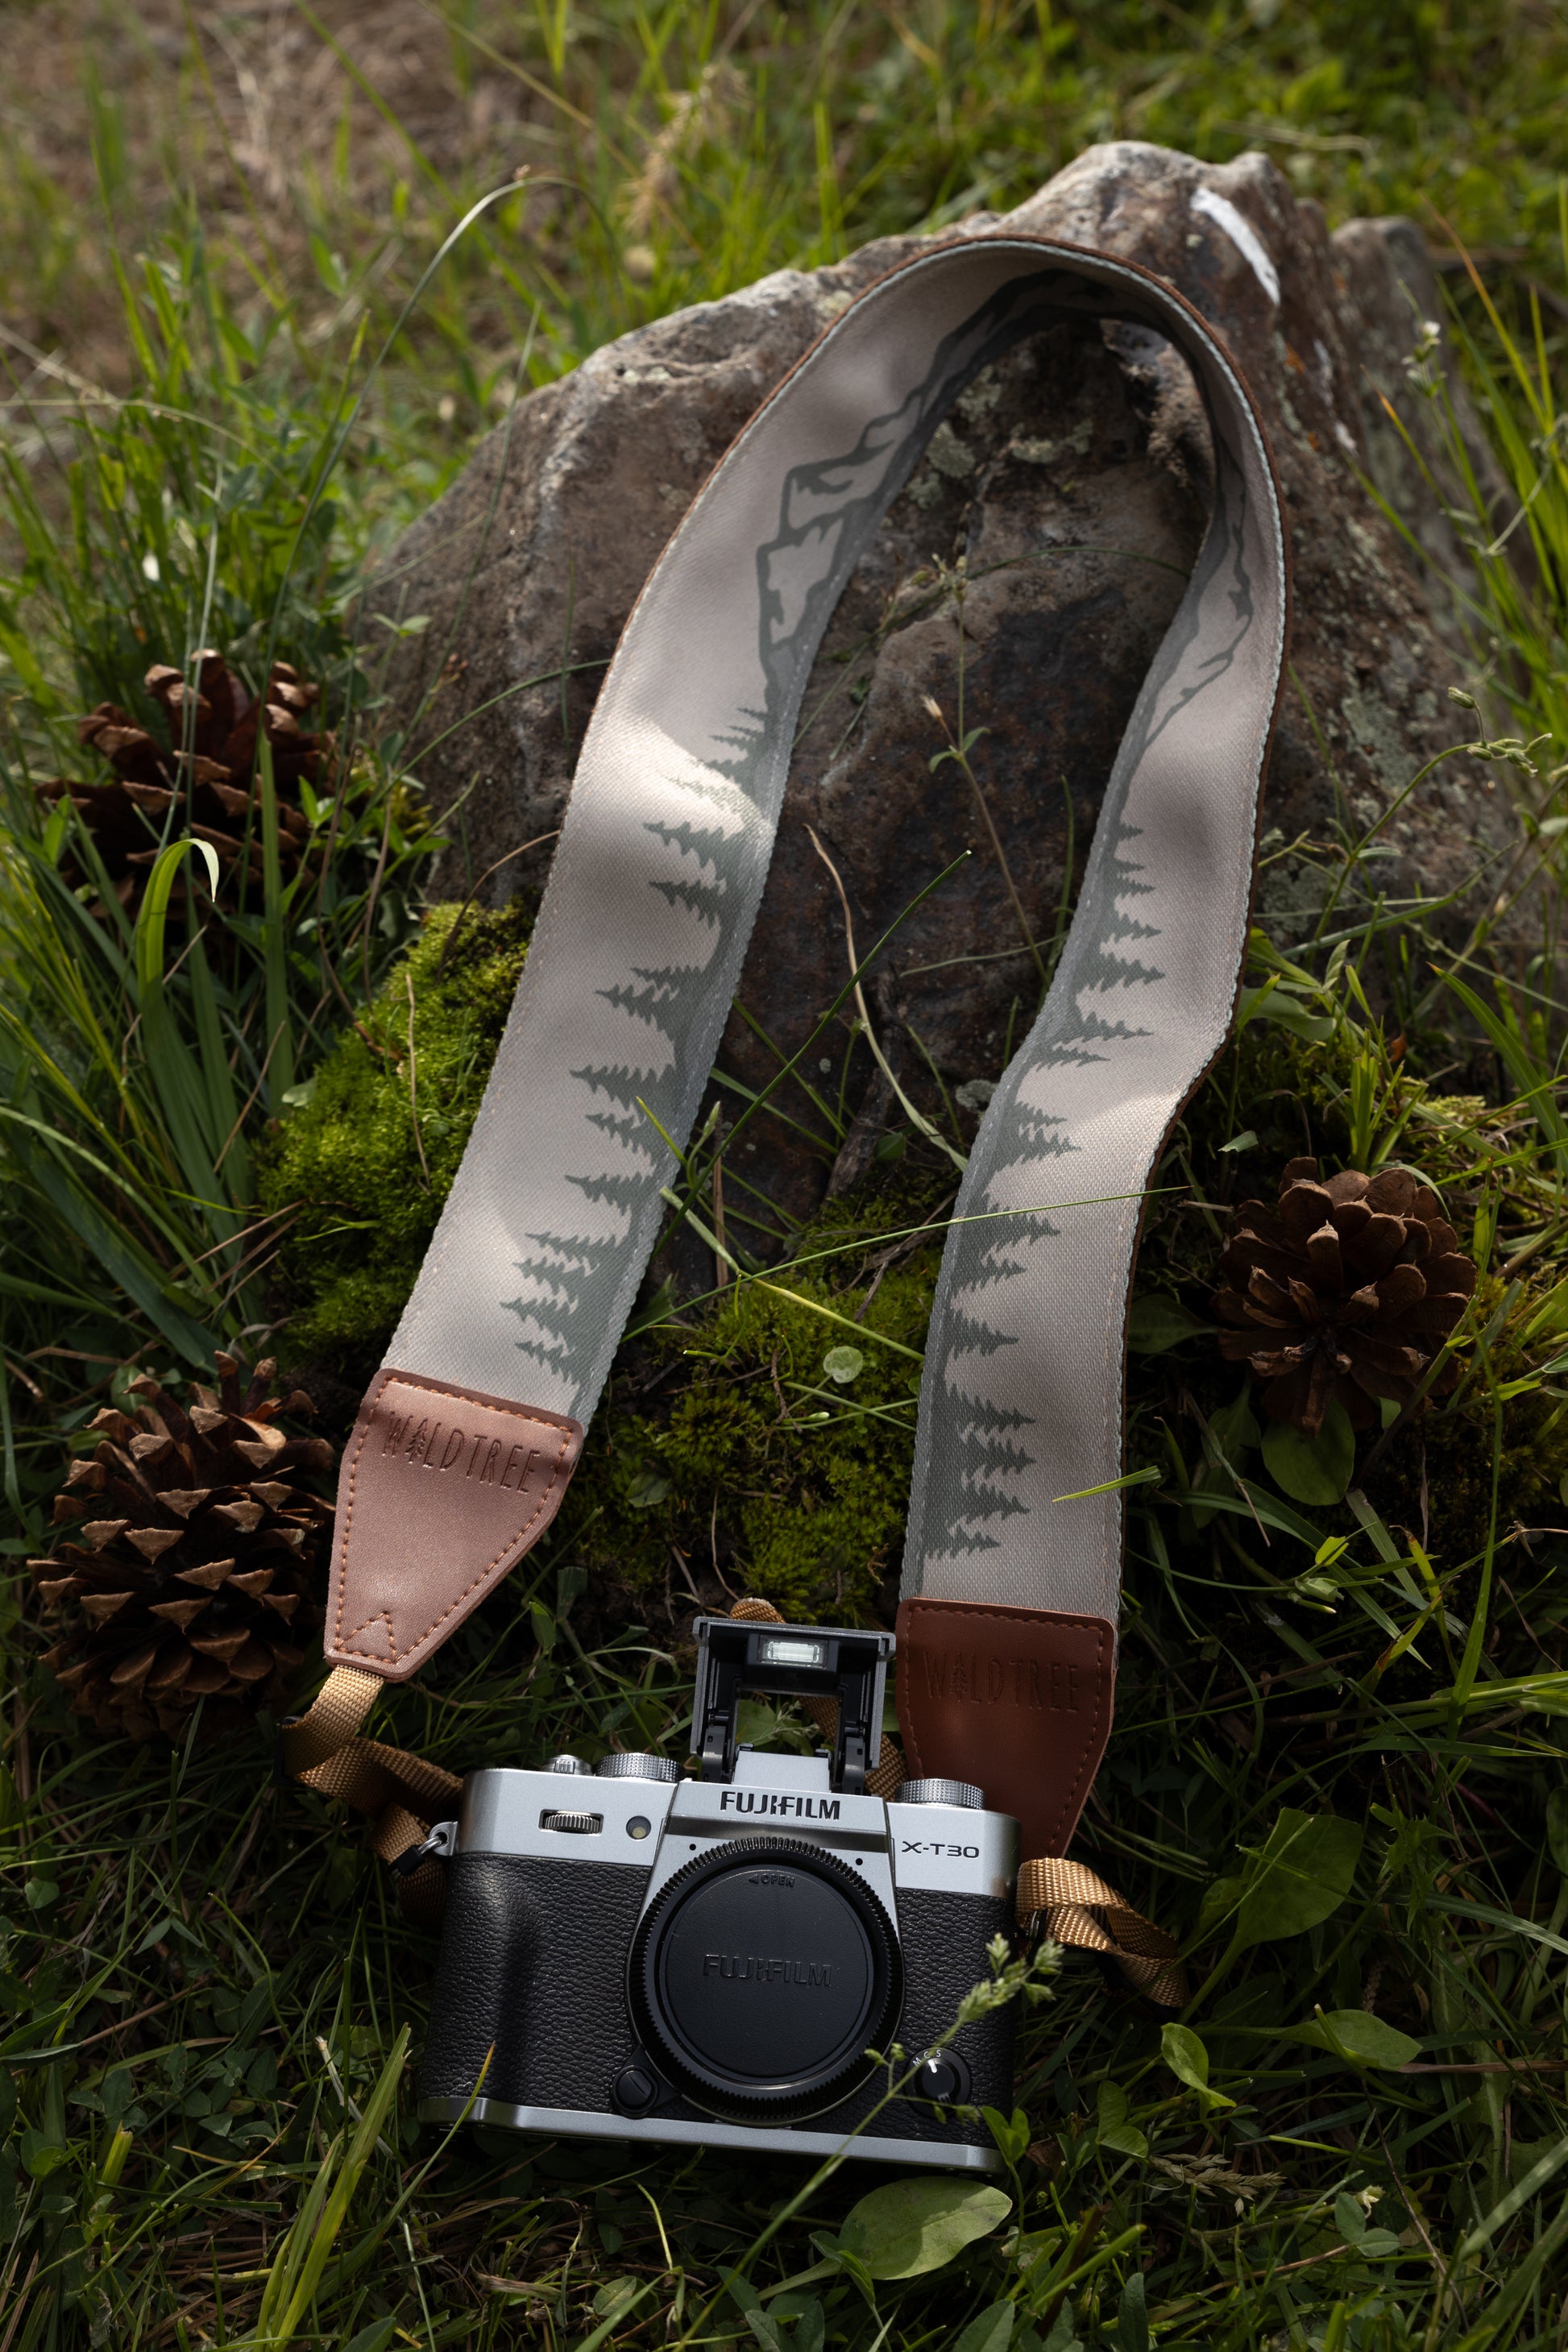 Wildtree camera strap printed with trees and mountains laying on forest floor connected to fujifilm x-t30 camera